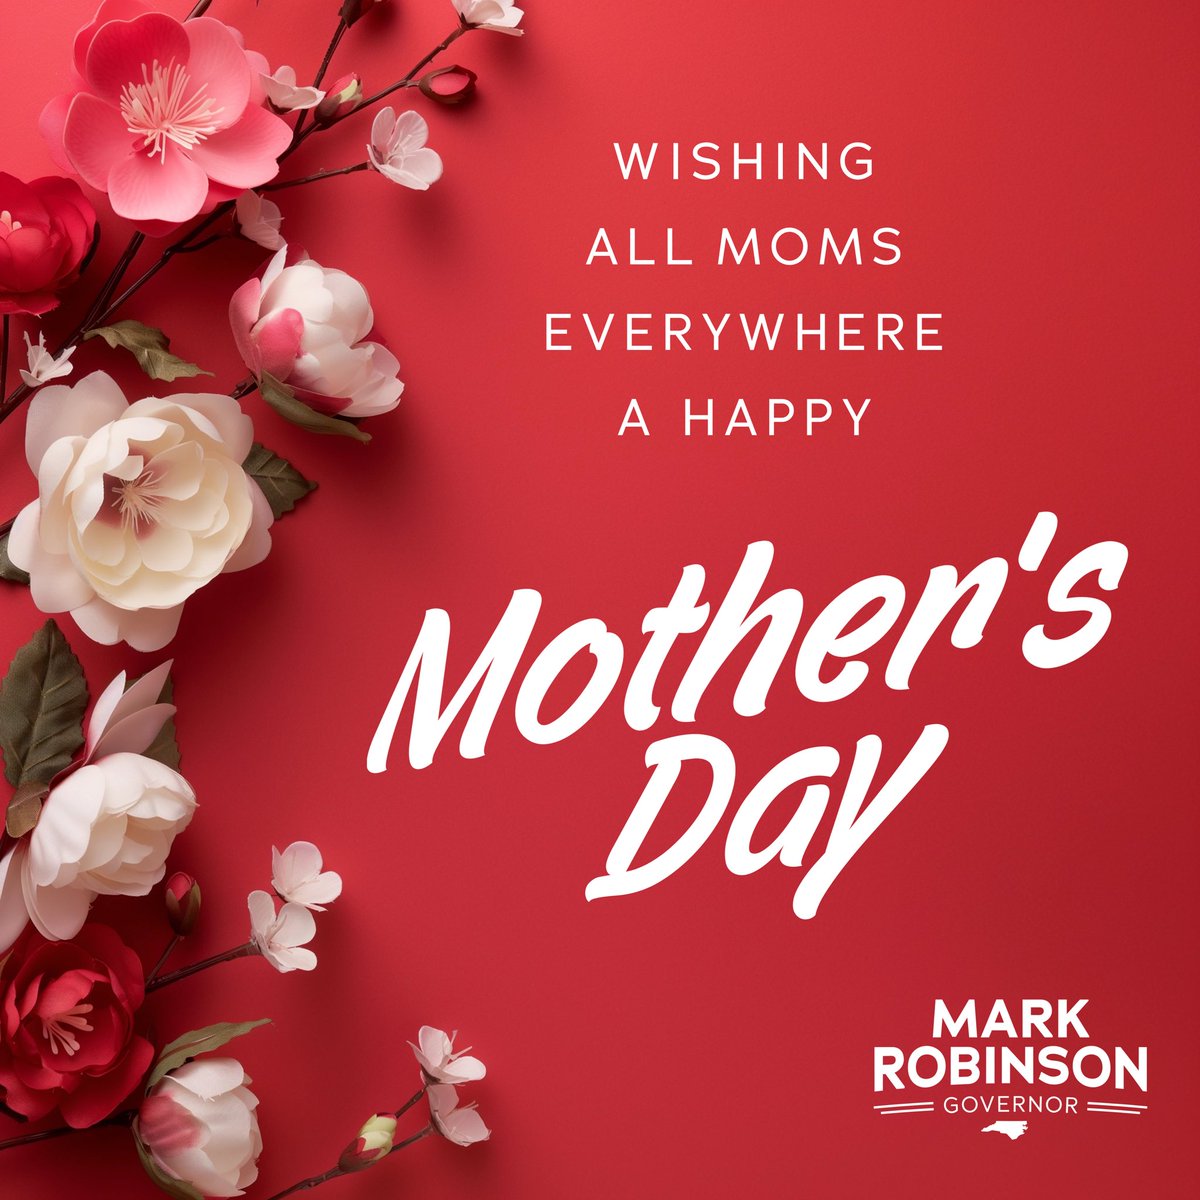 On Mother's Day, we celebrate the immeasurable love, strength, and sacrifice of moms everywhere. Thank you to all the incredible women who shape our lives and inspire us to be better every day.